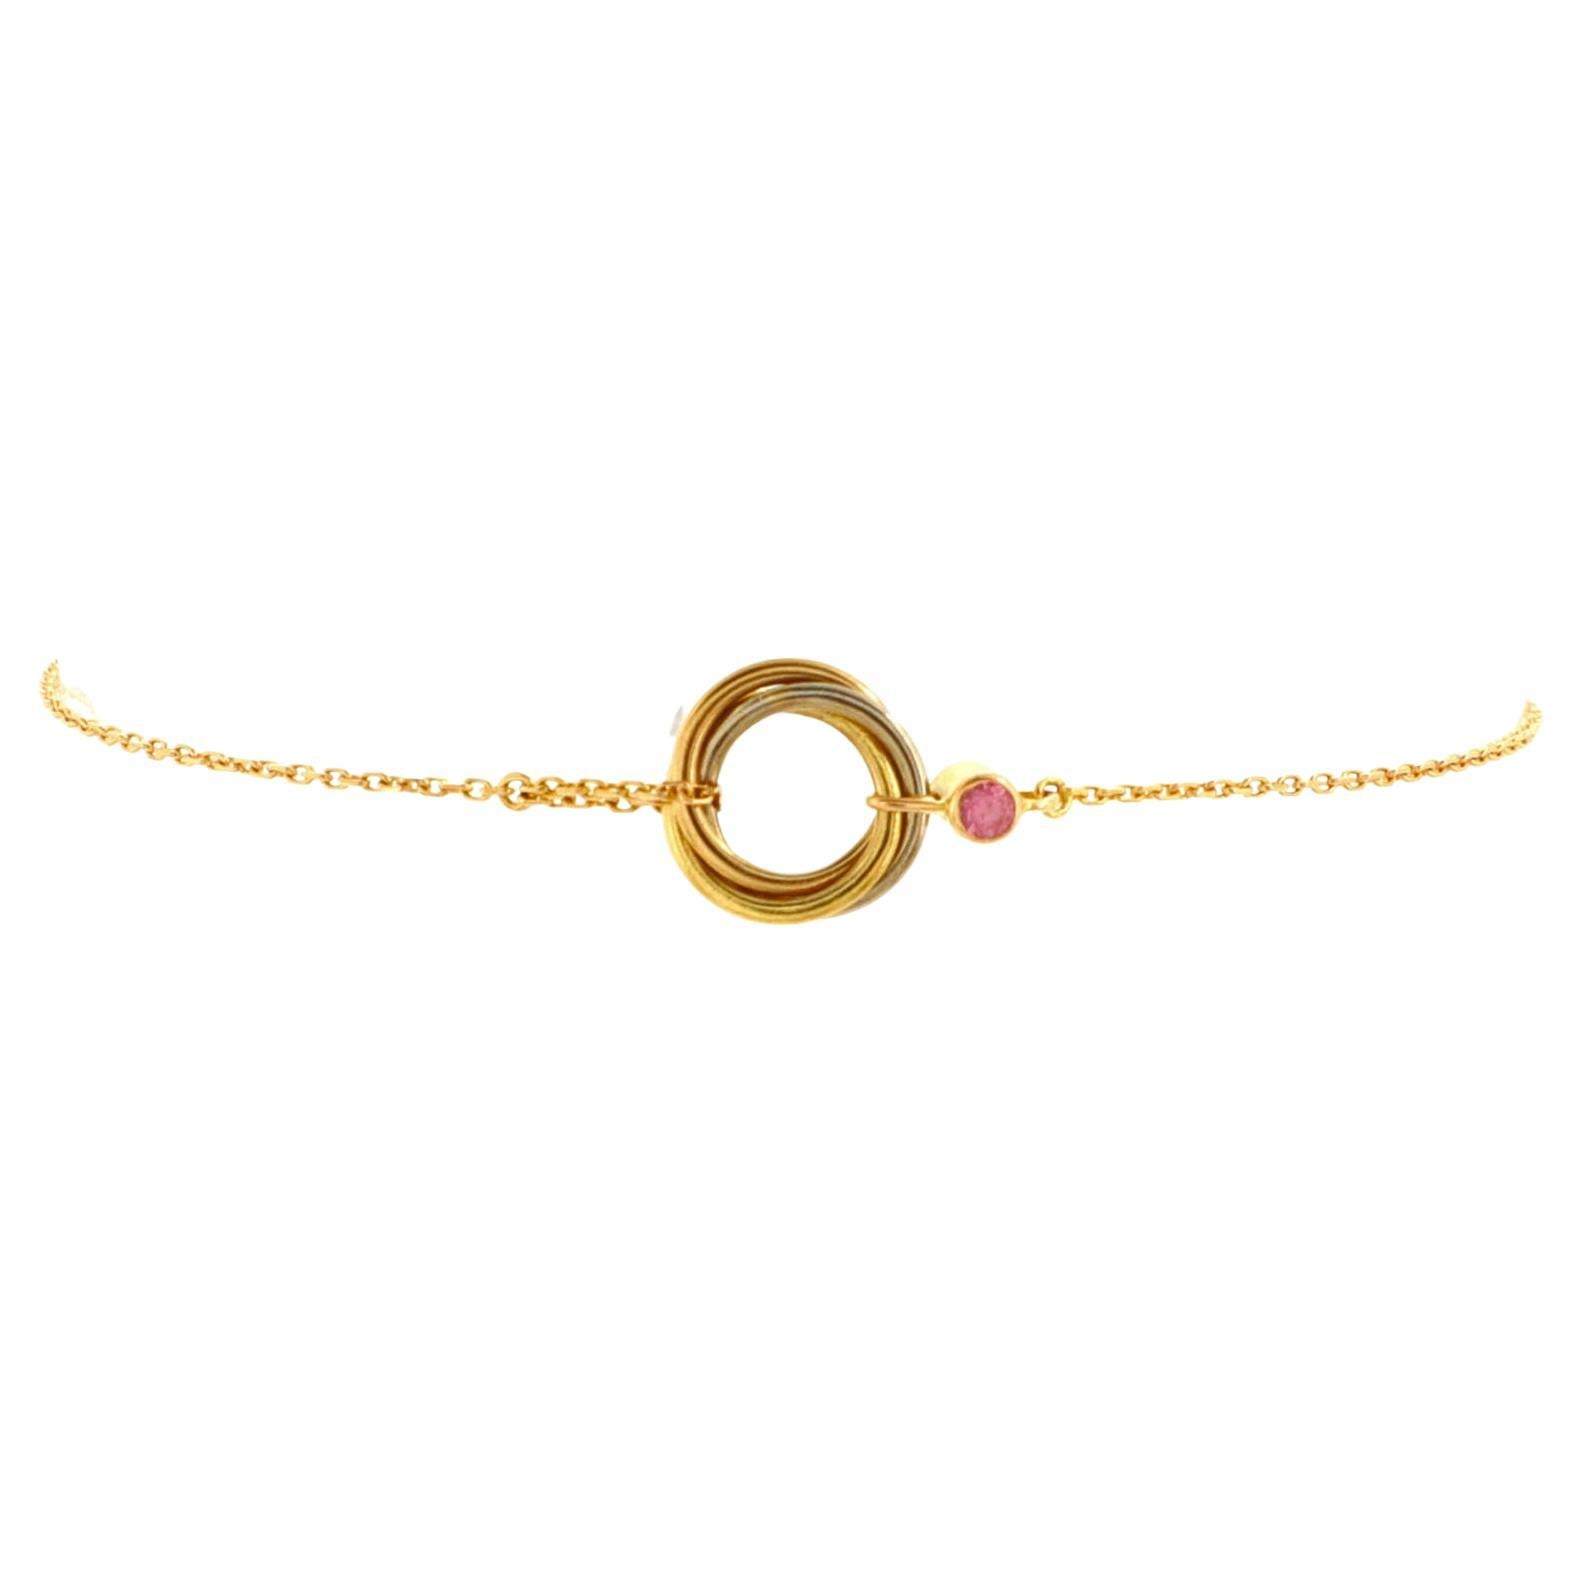 Cartier Trinity Chain Bracelet 18k Tricolor Gold with Pink Sapphire